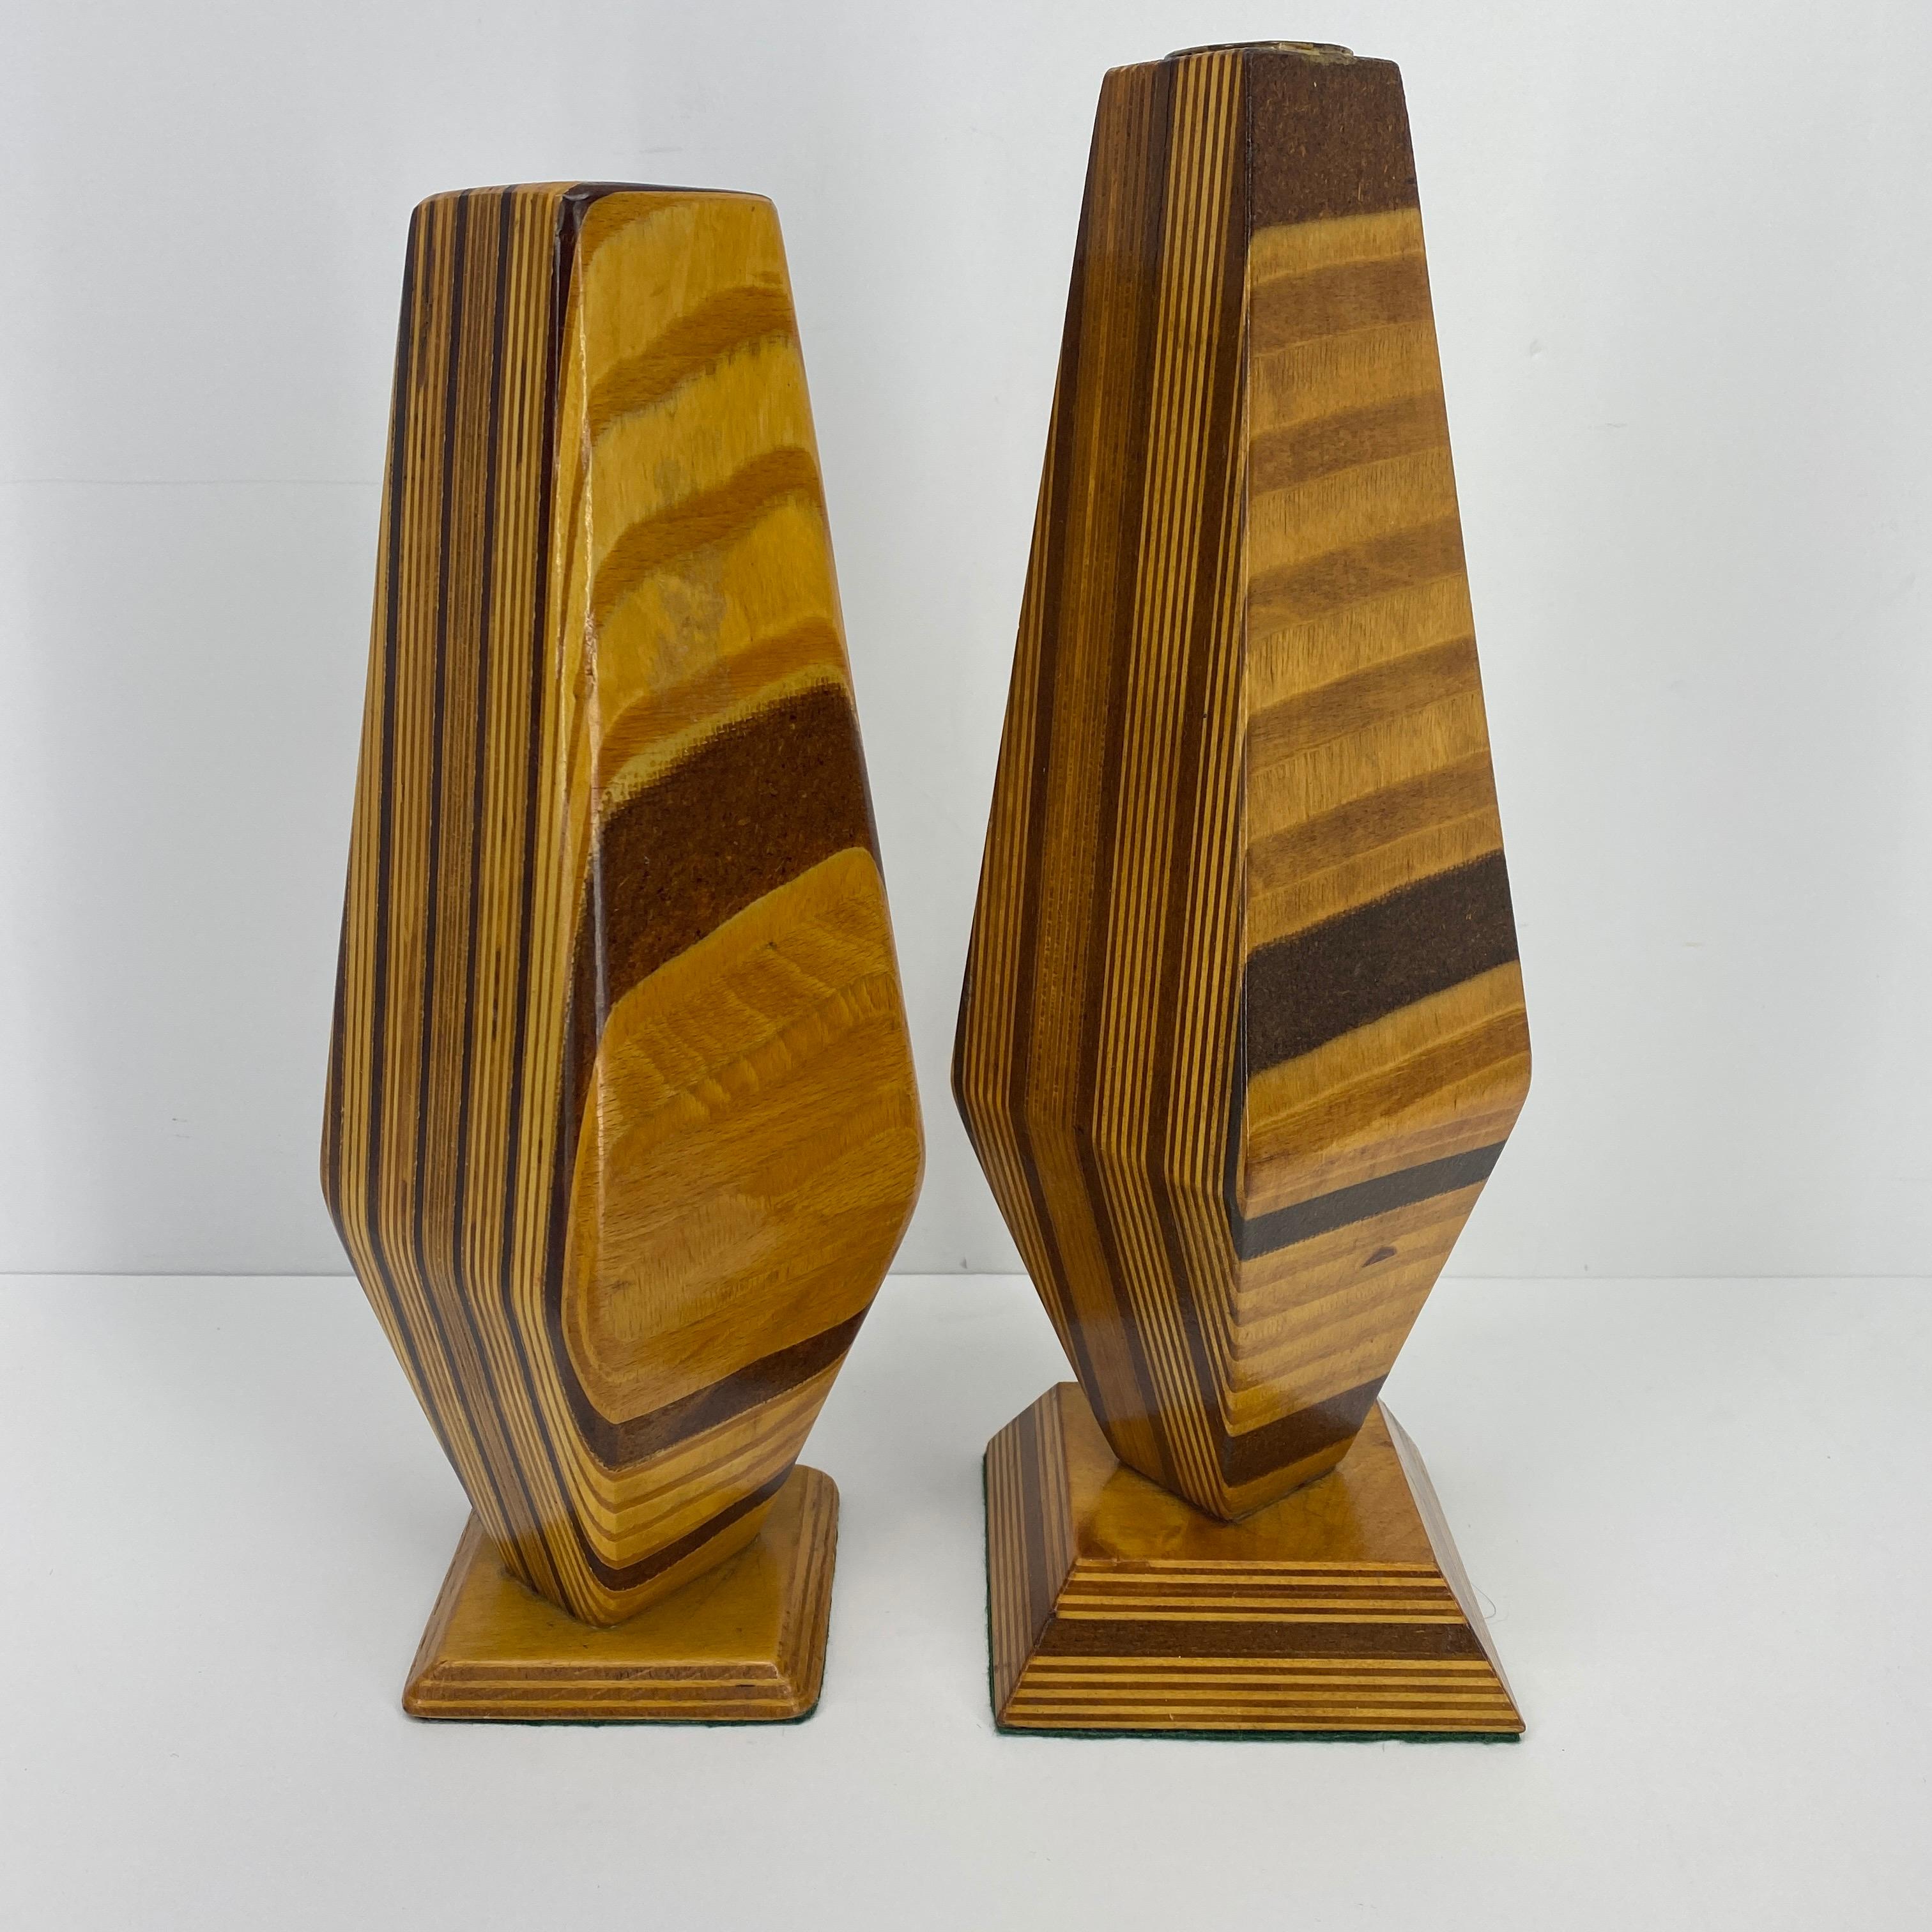 Inlay Pair of Tall Mid-Century Modern Wooden Candle Holders